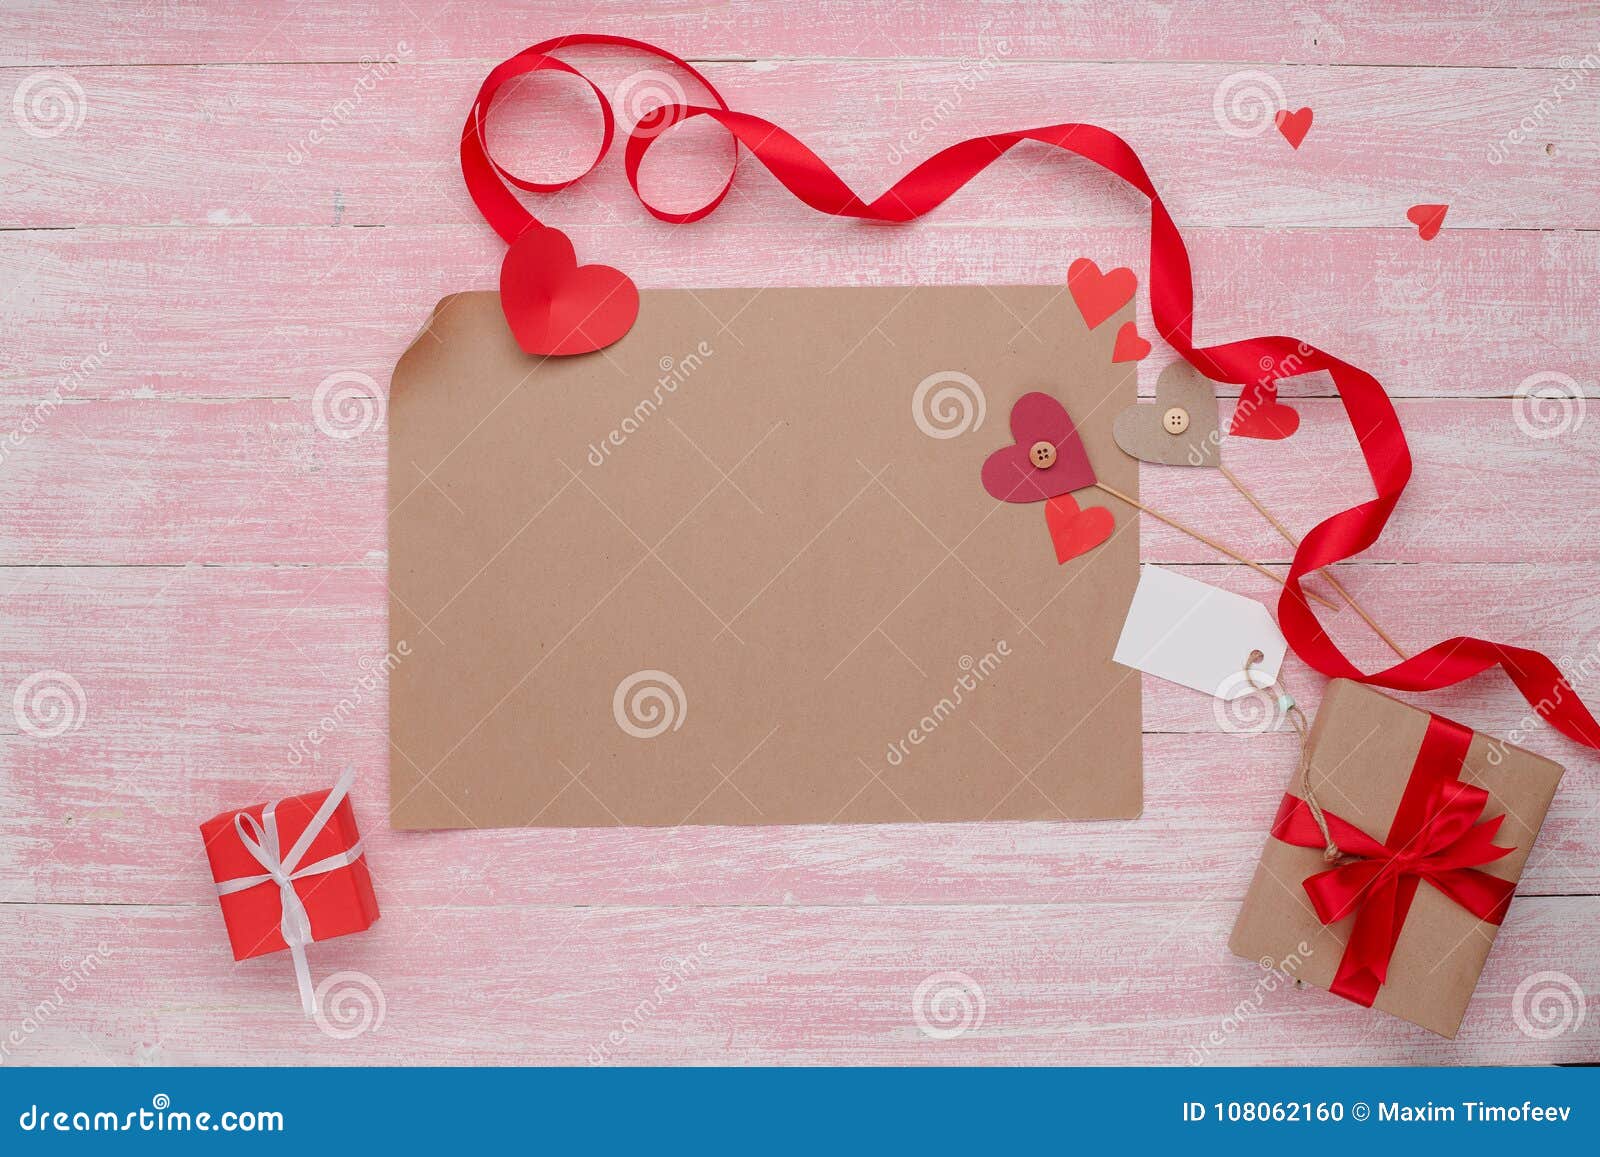 Happy Valentines Day Love Celebration in a Rustic Style . Stock Photo ...